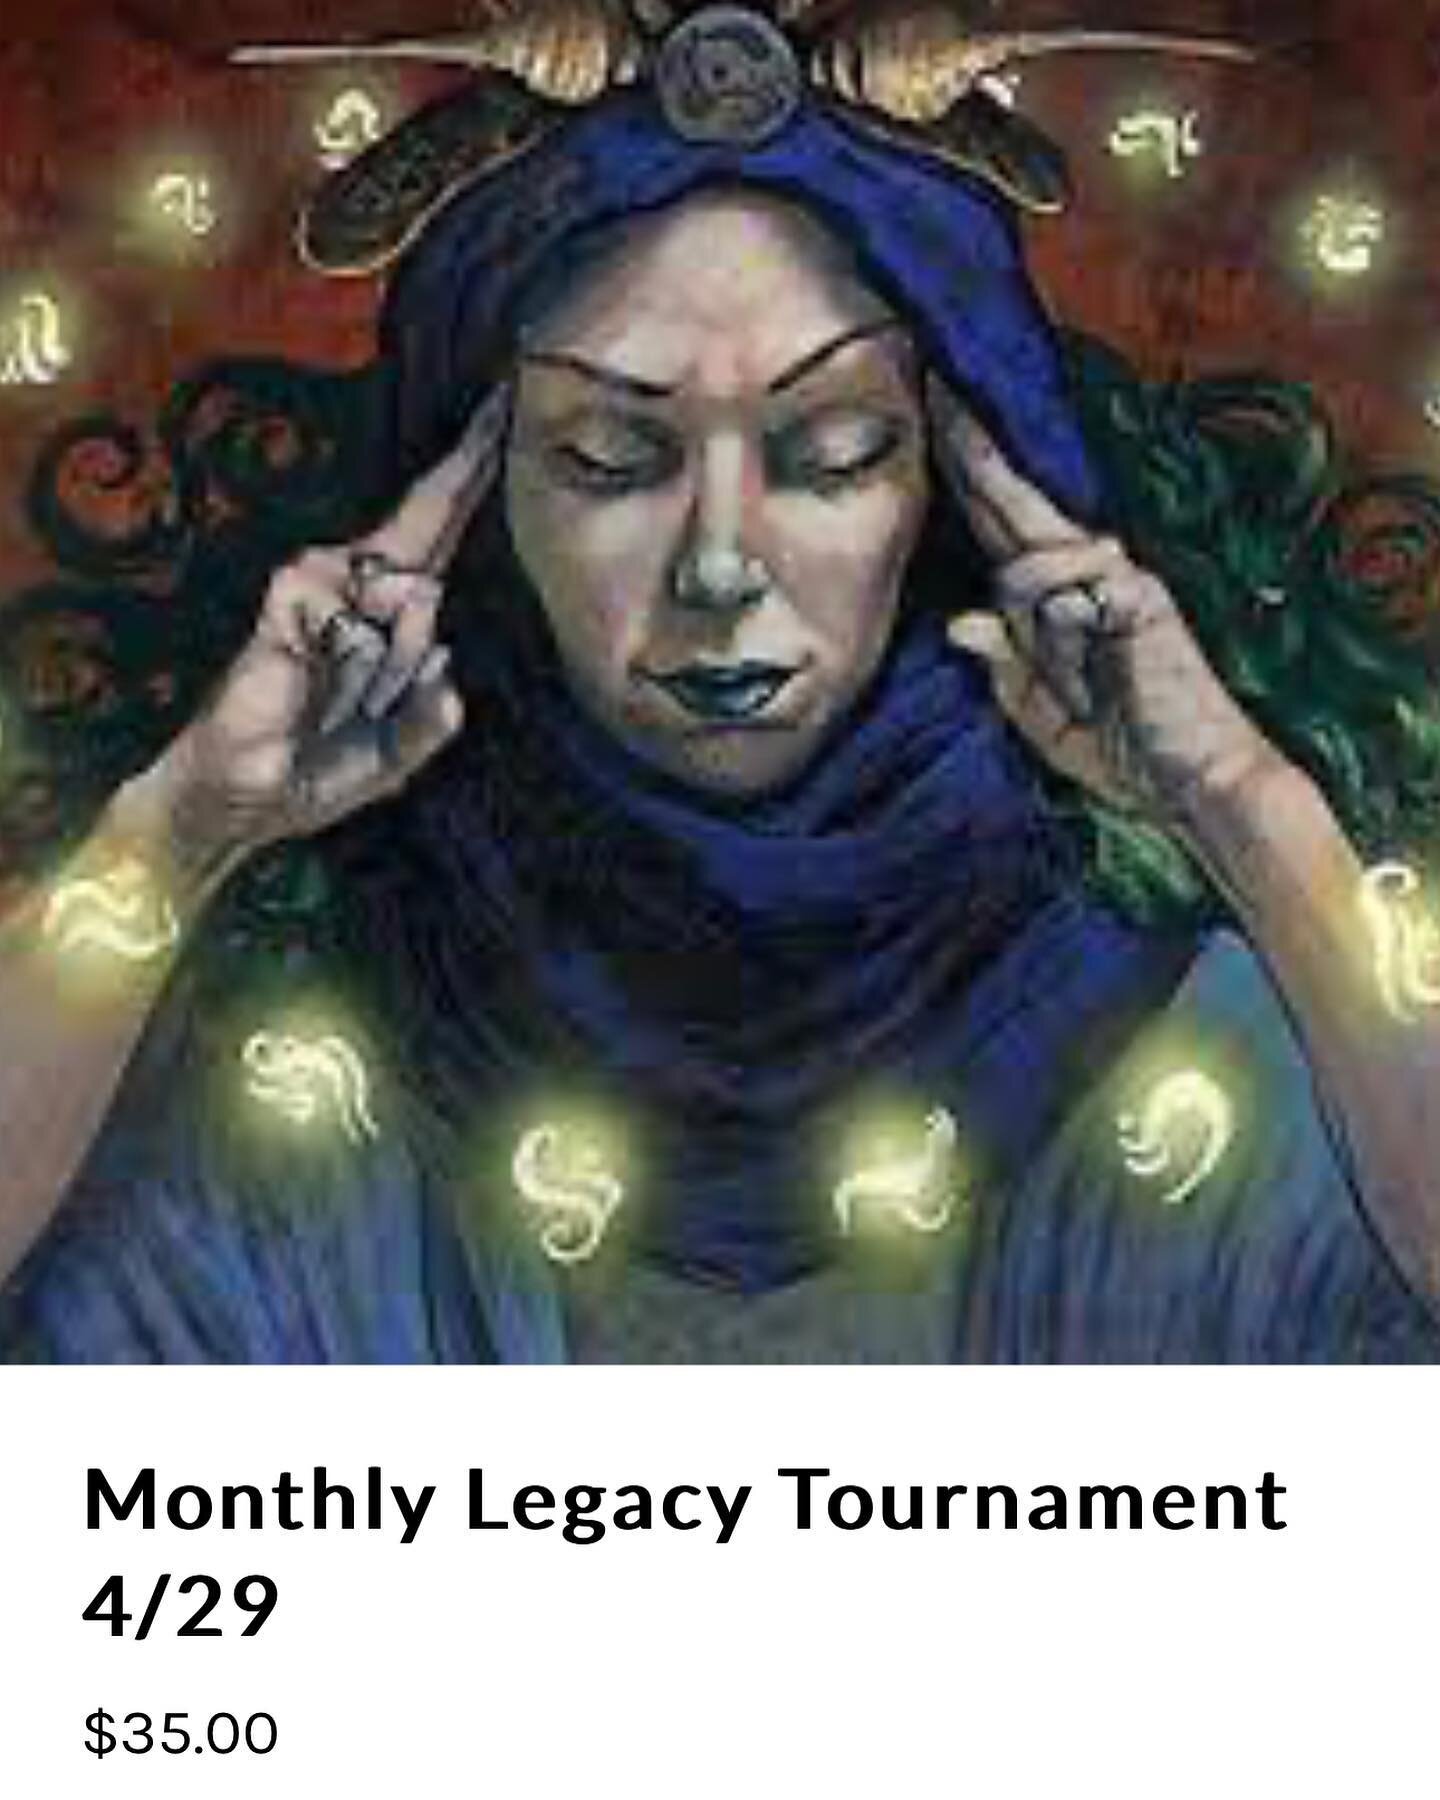 Our next monthly Legacy tournament is this Saturday at 12pm! At 32 players, prizes scale up to 1k in store credit. Maximum capacity is also 32 players. 

Link to preregister is in the bio.